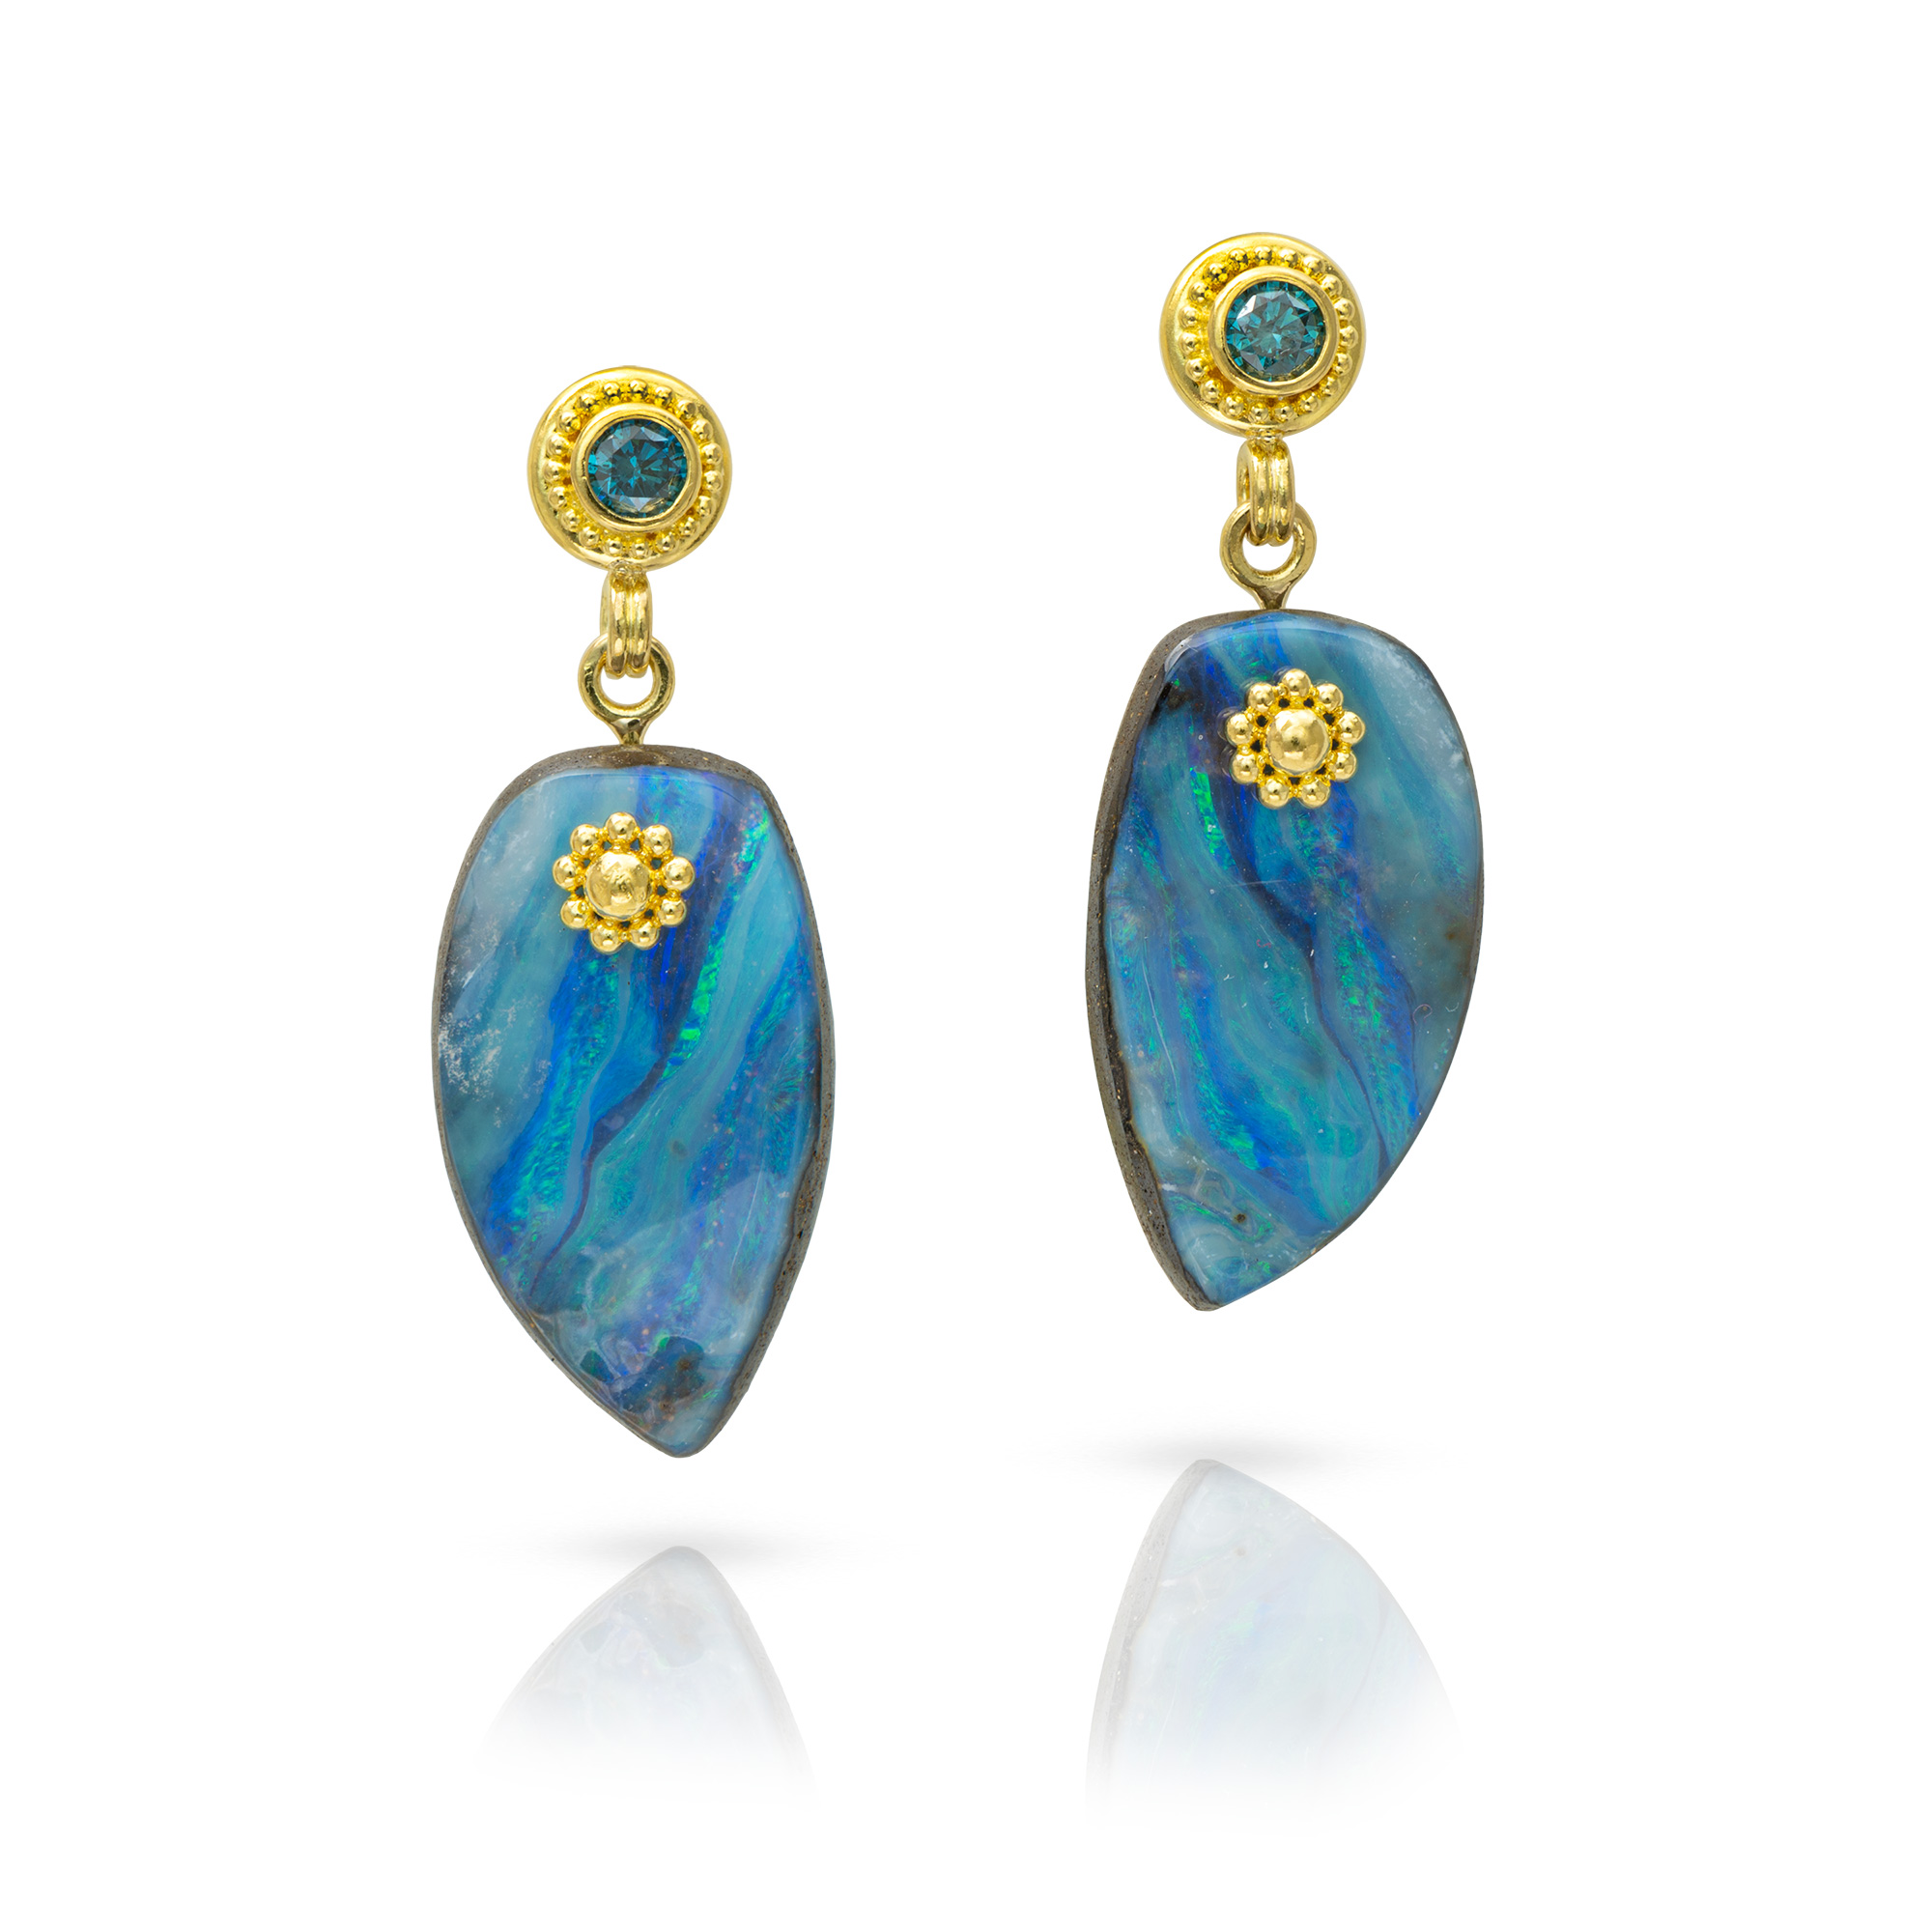 22kt granulation earrings with opals